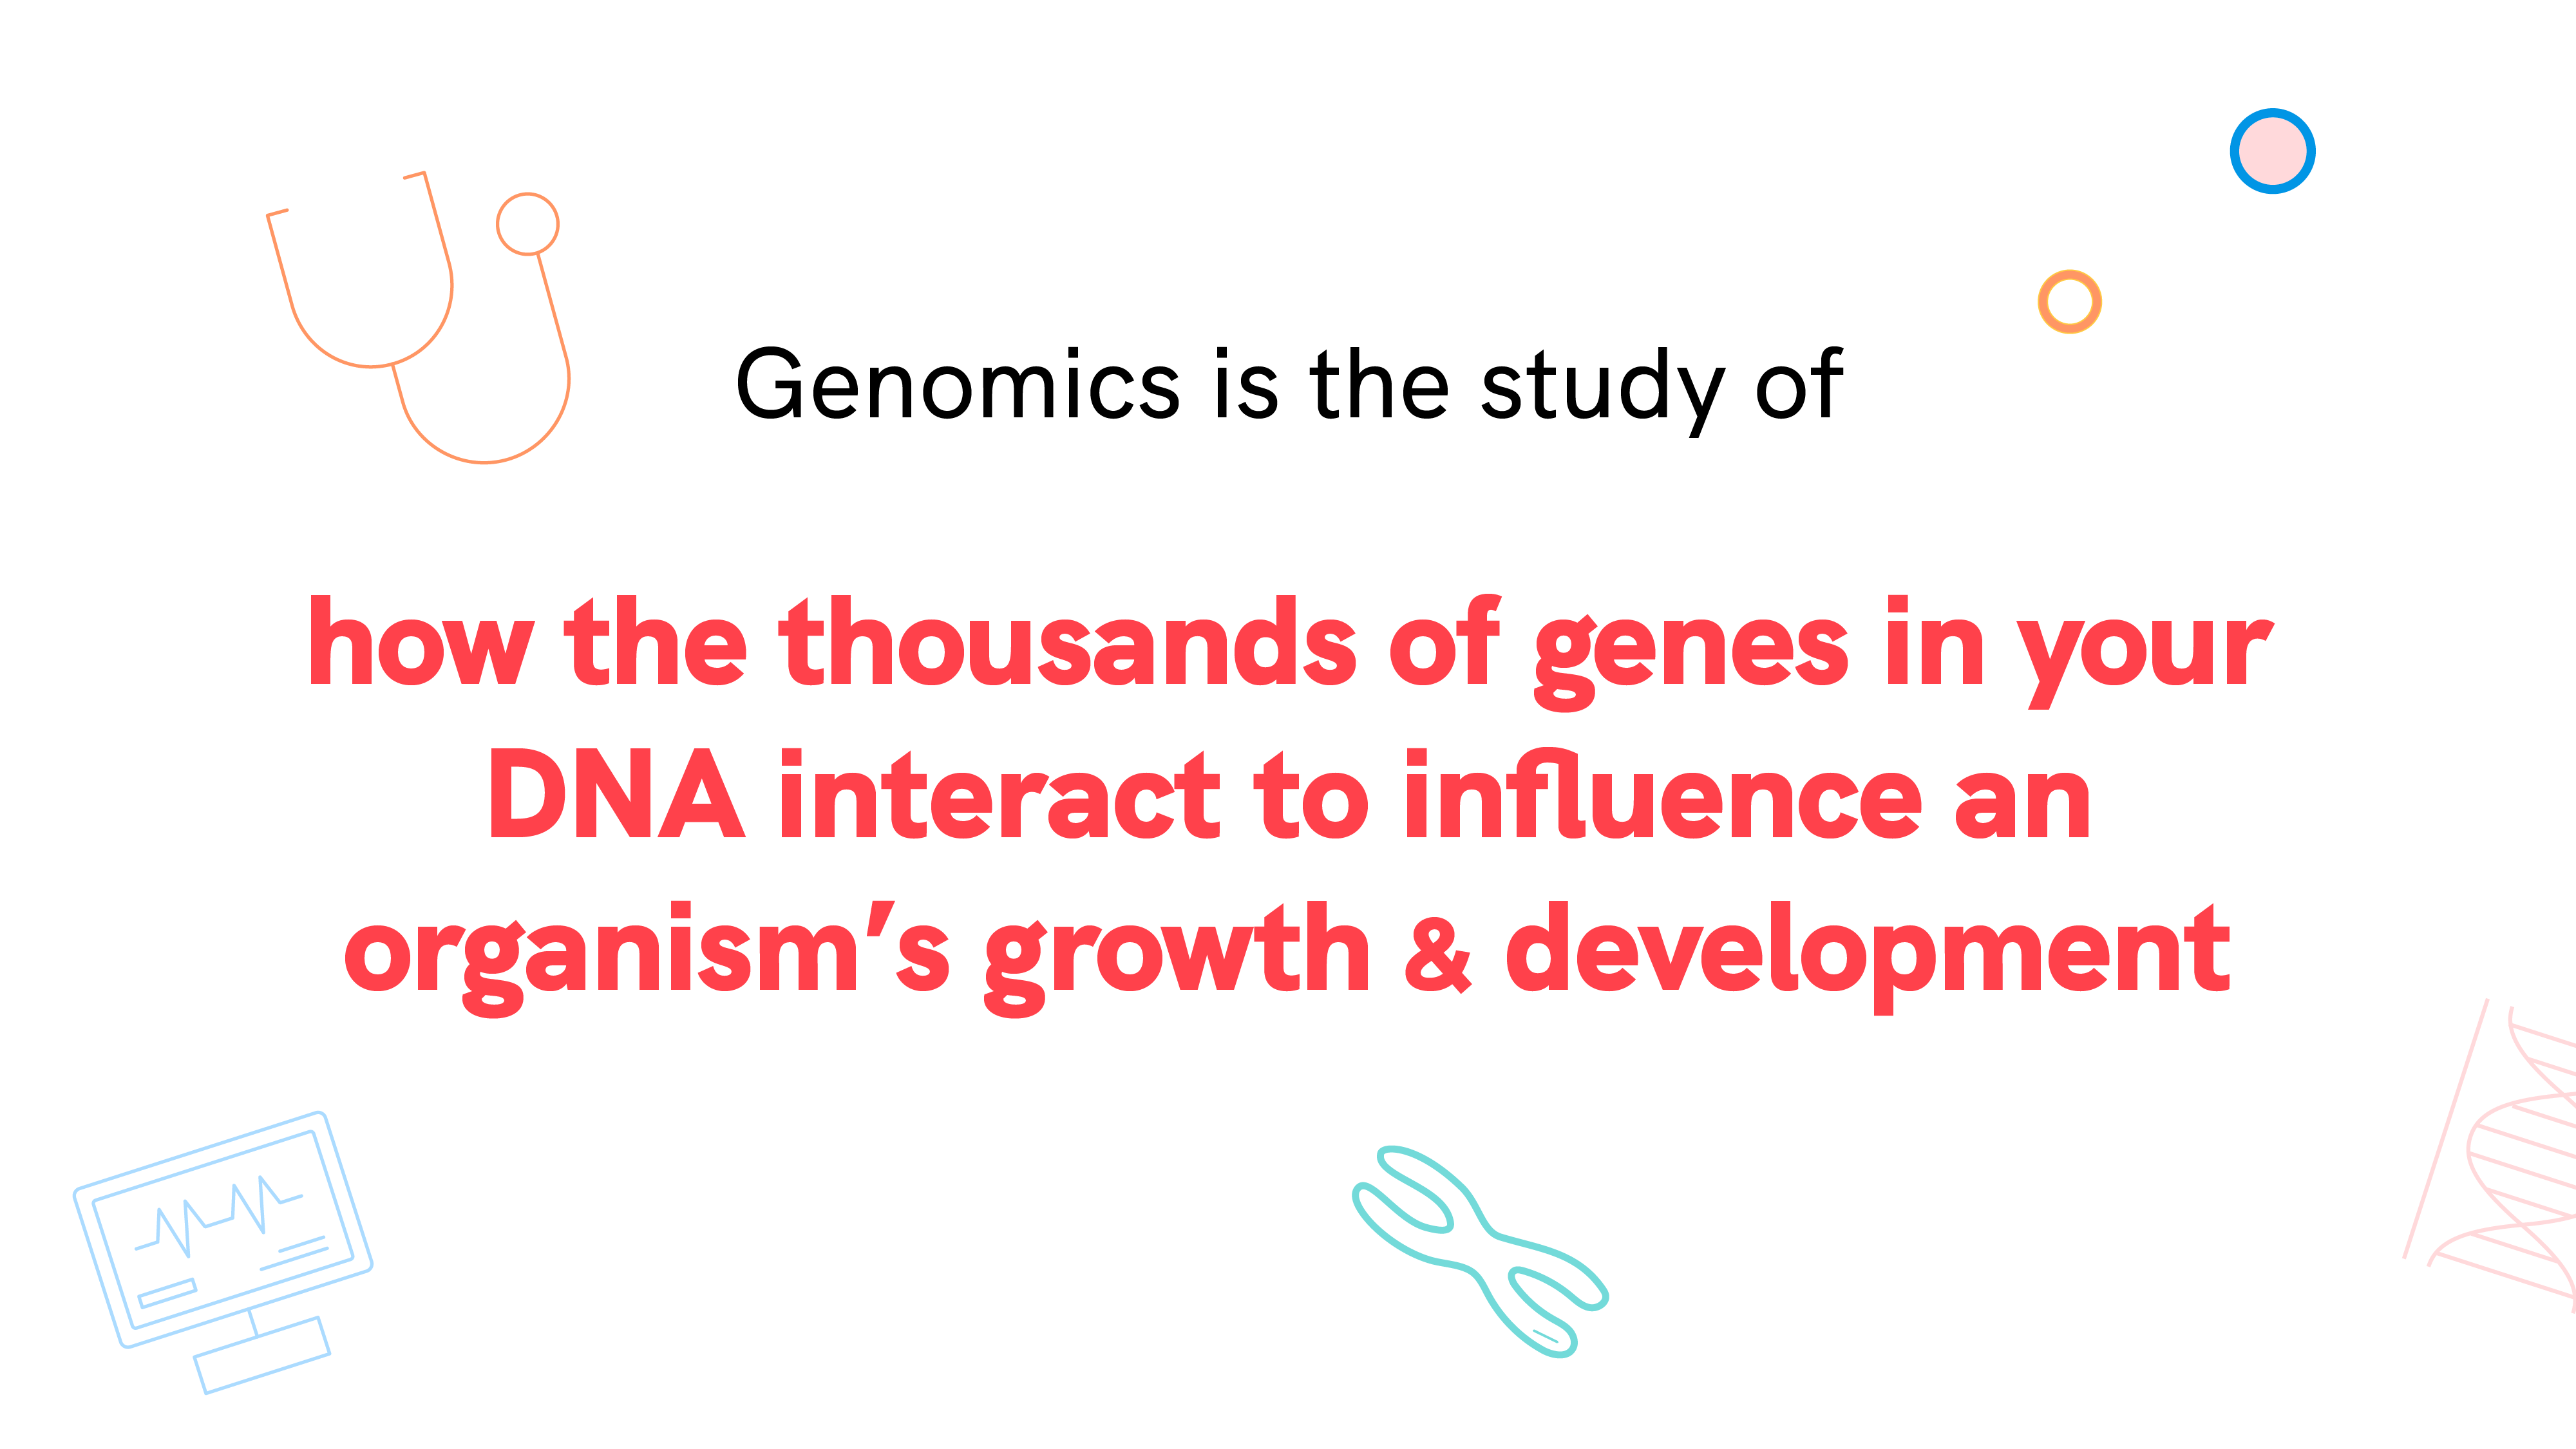 Genomics is the study of how the thousands of genes in your DNA interact to influence an organism’s growth and development